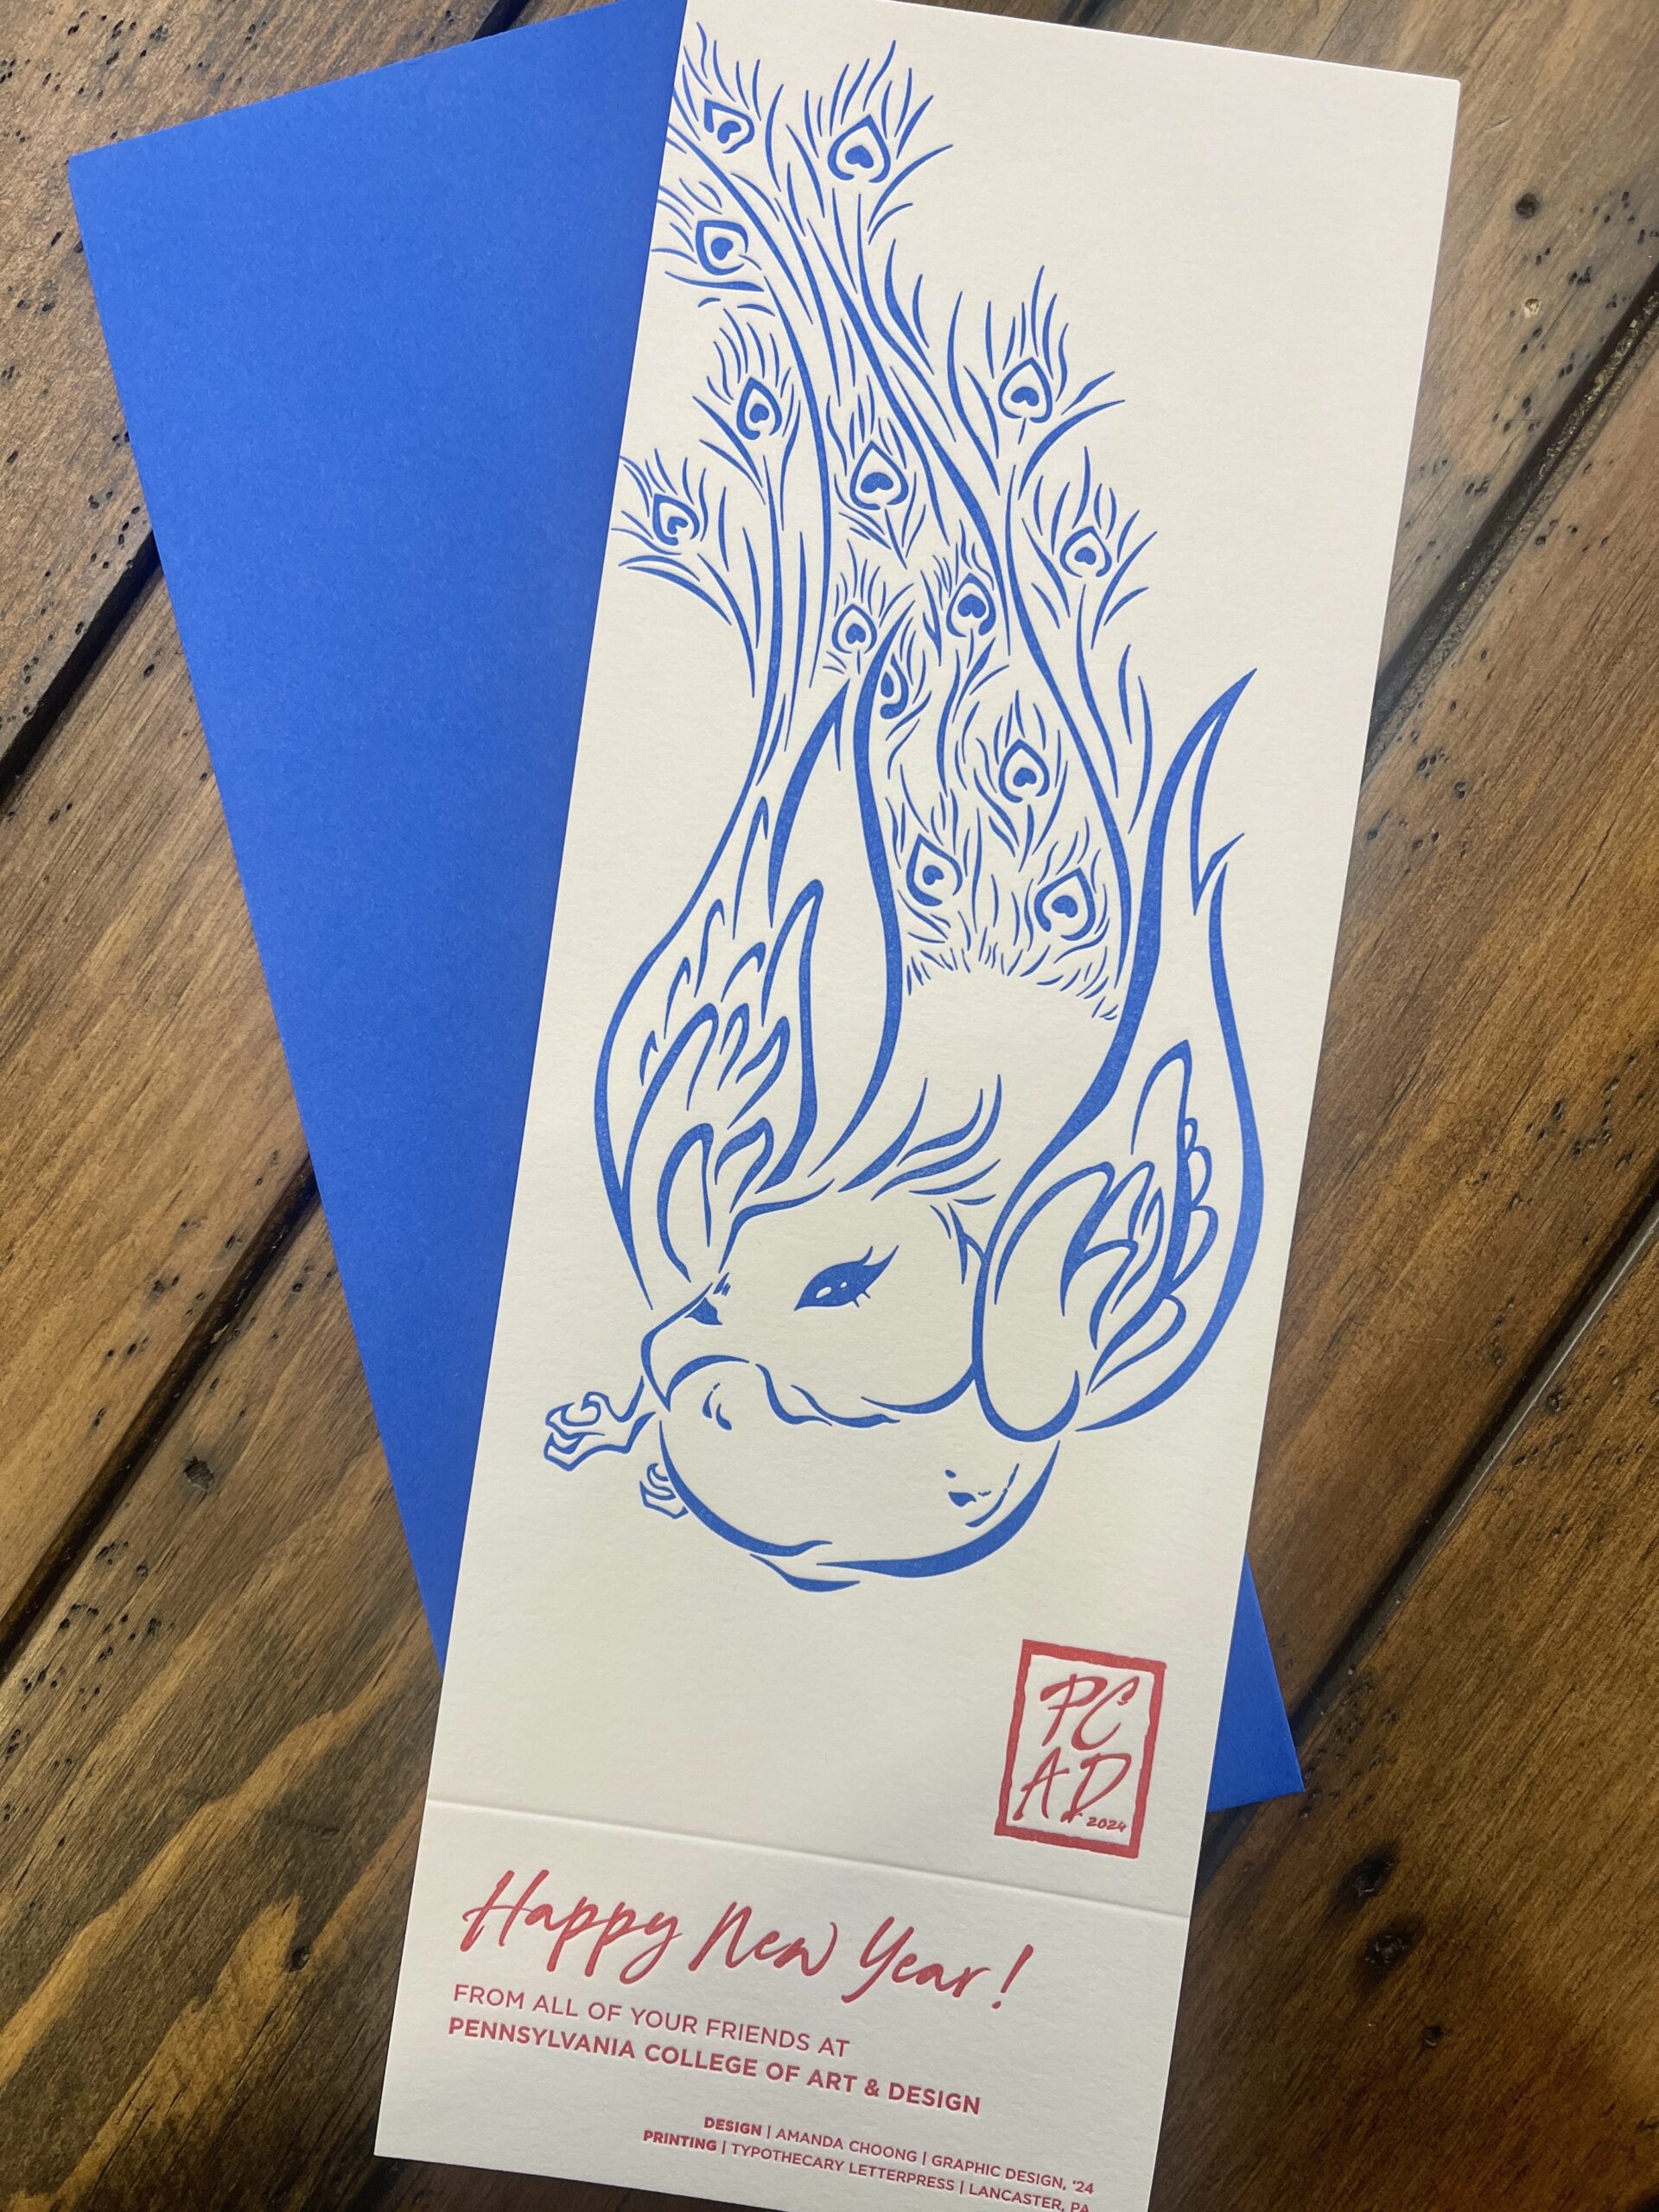 Vertical white New Year's greeting card with image of blue peacock and red text.